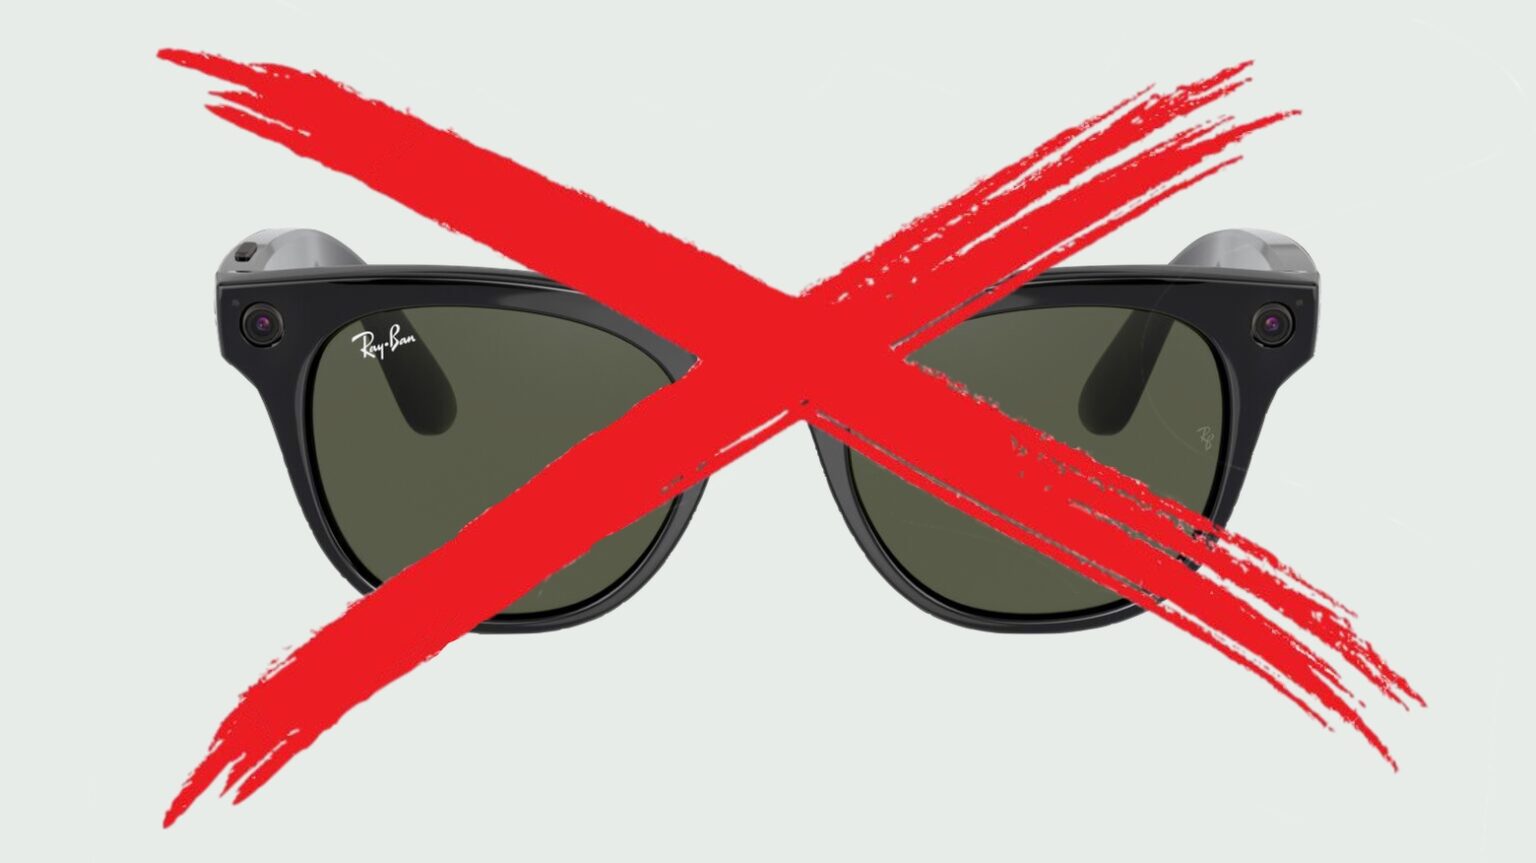 See here, Apple: Leave cameras out of your smartglasses